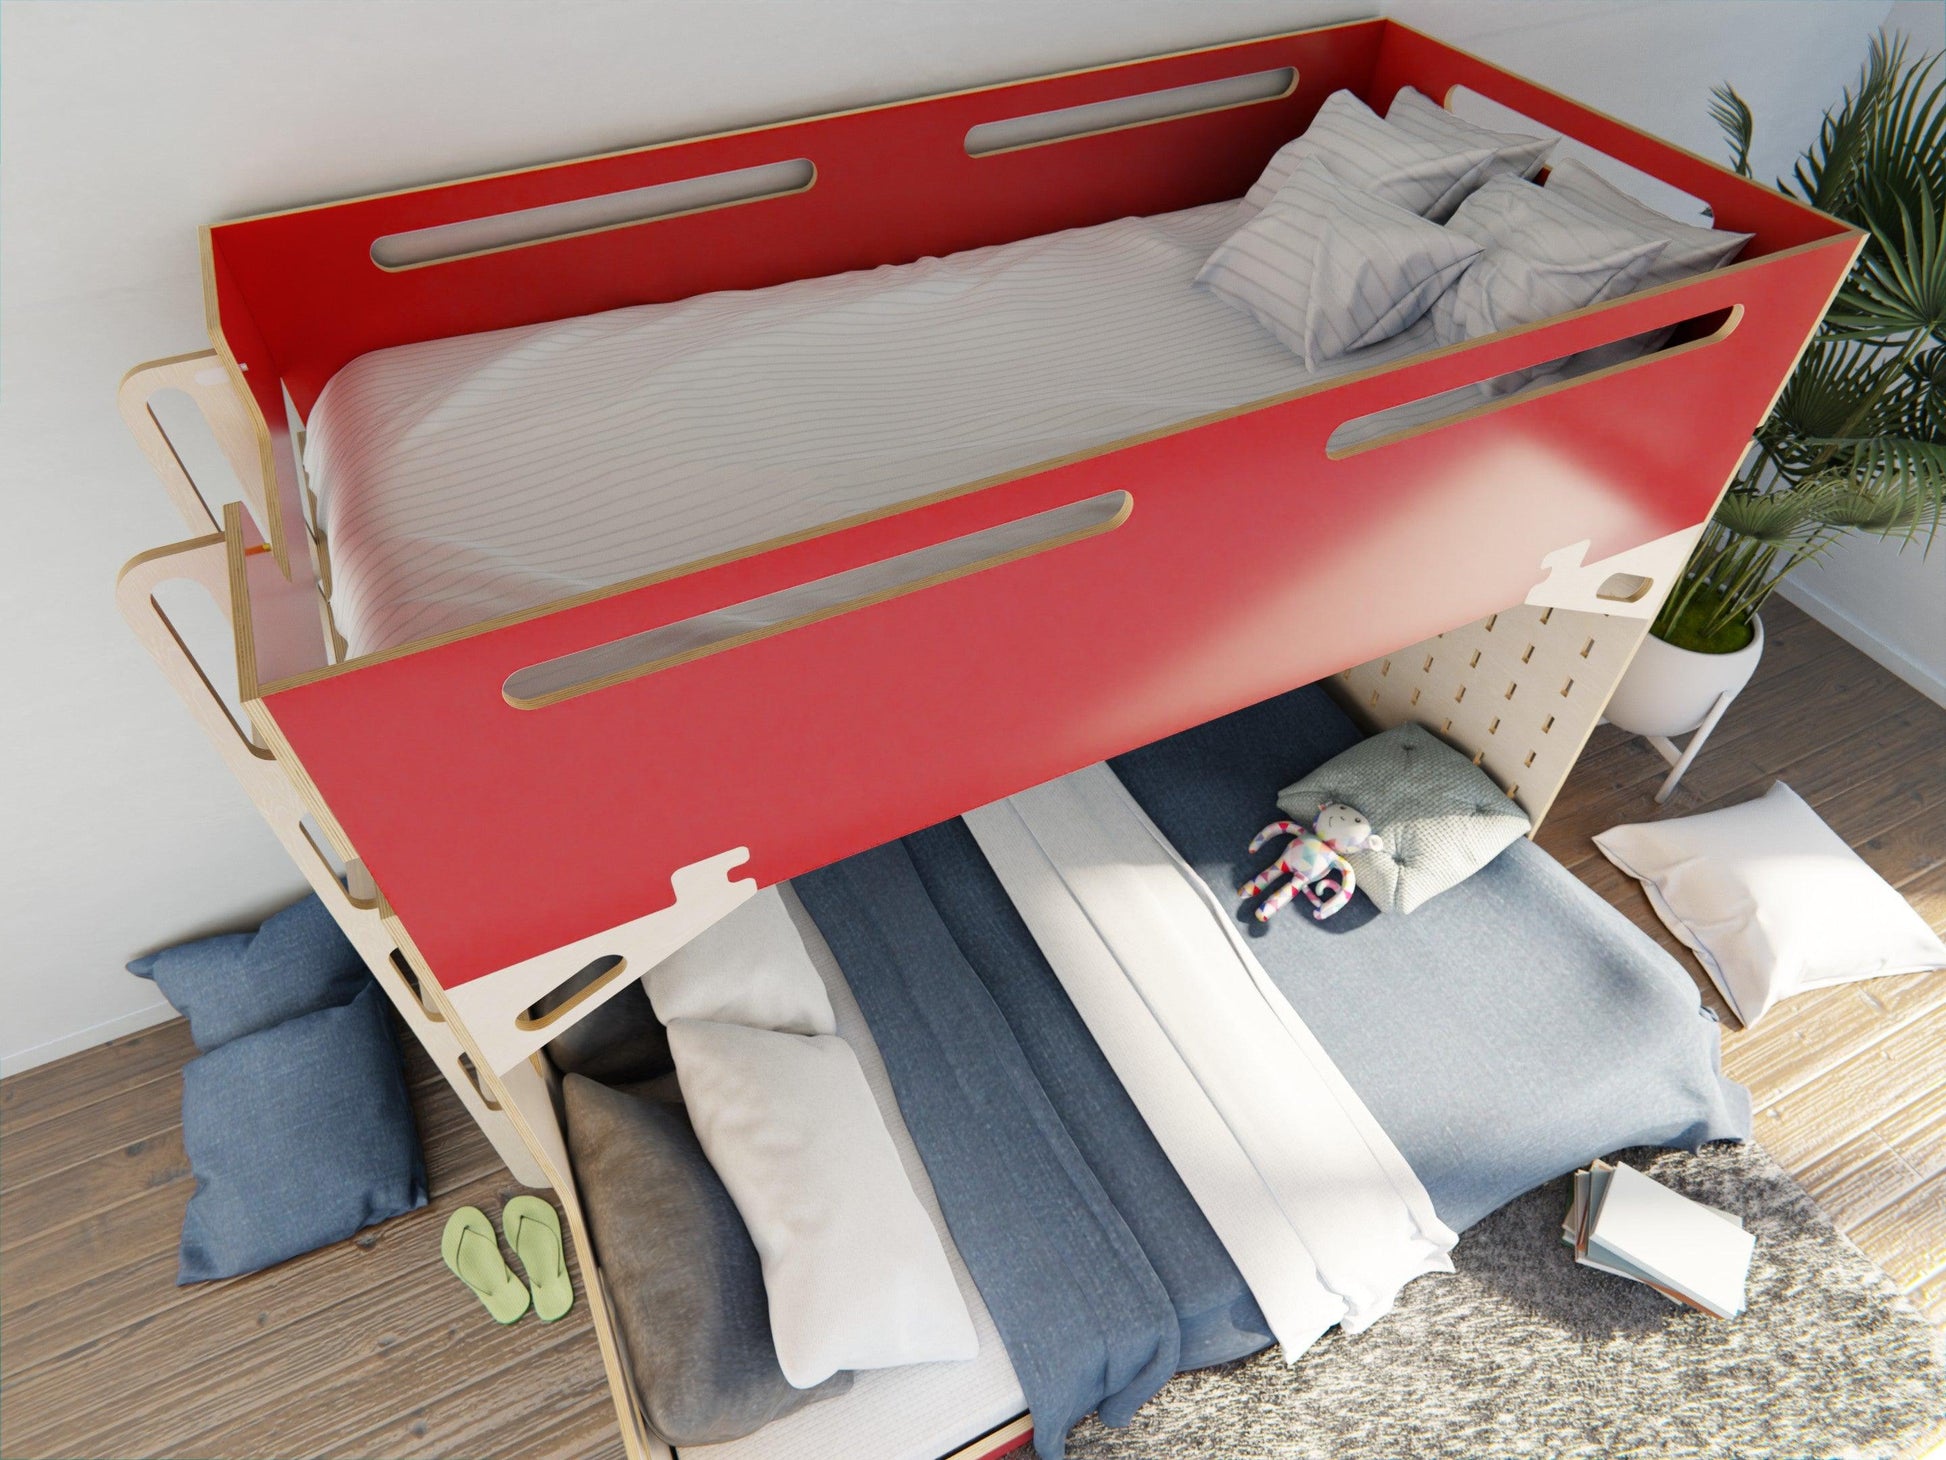 Space-saving triple bunk bed in red.